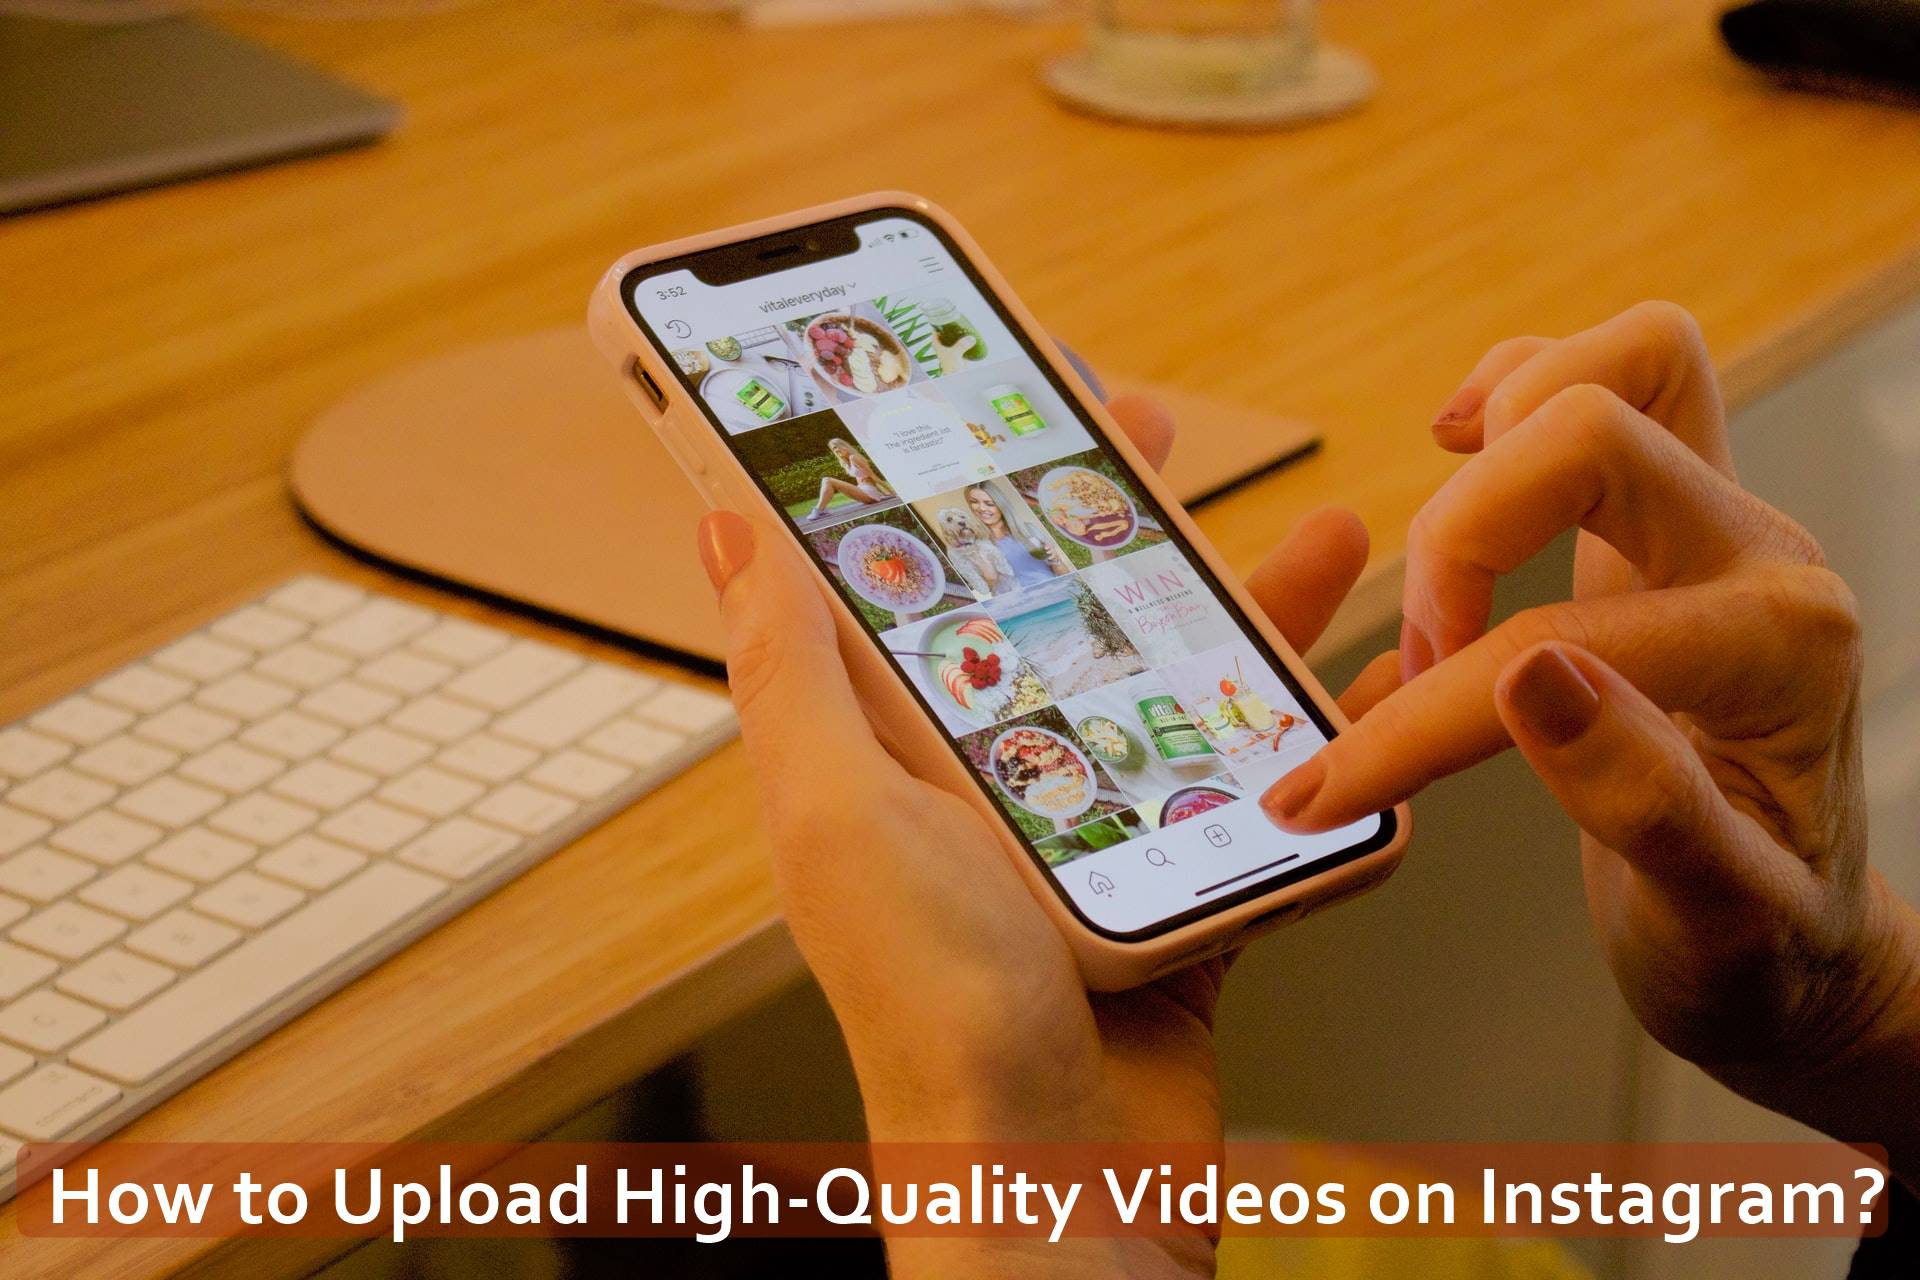 How to Upload High-Quality Videos on Instagram?